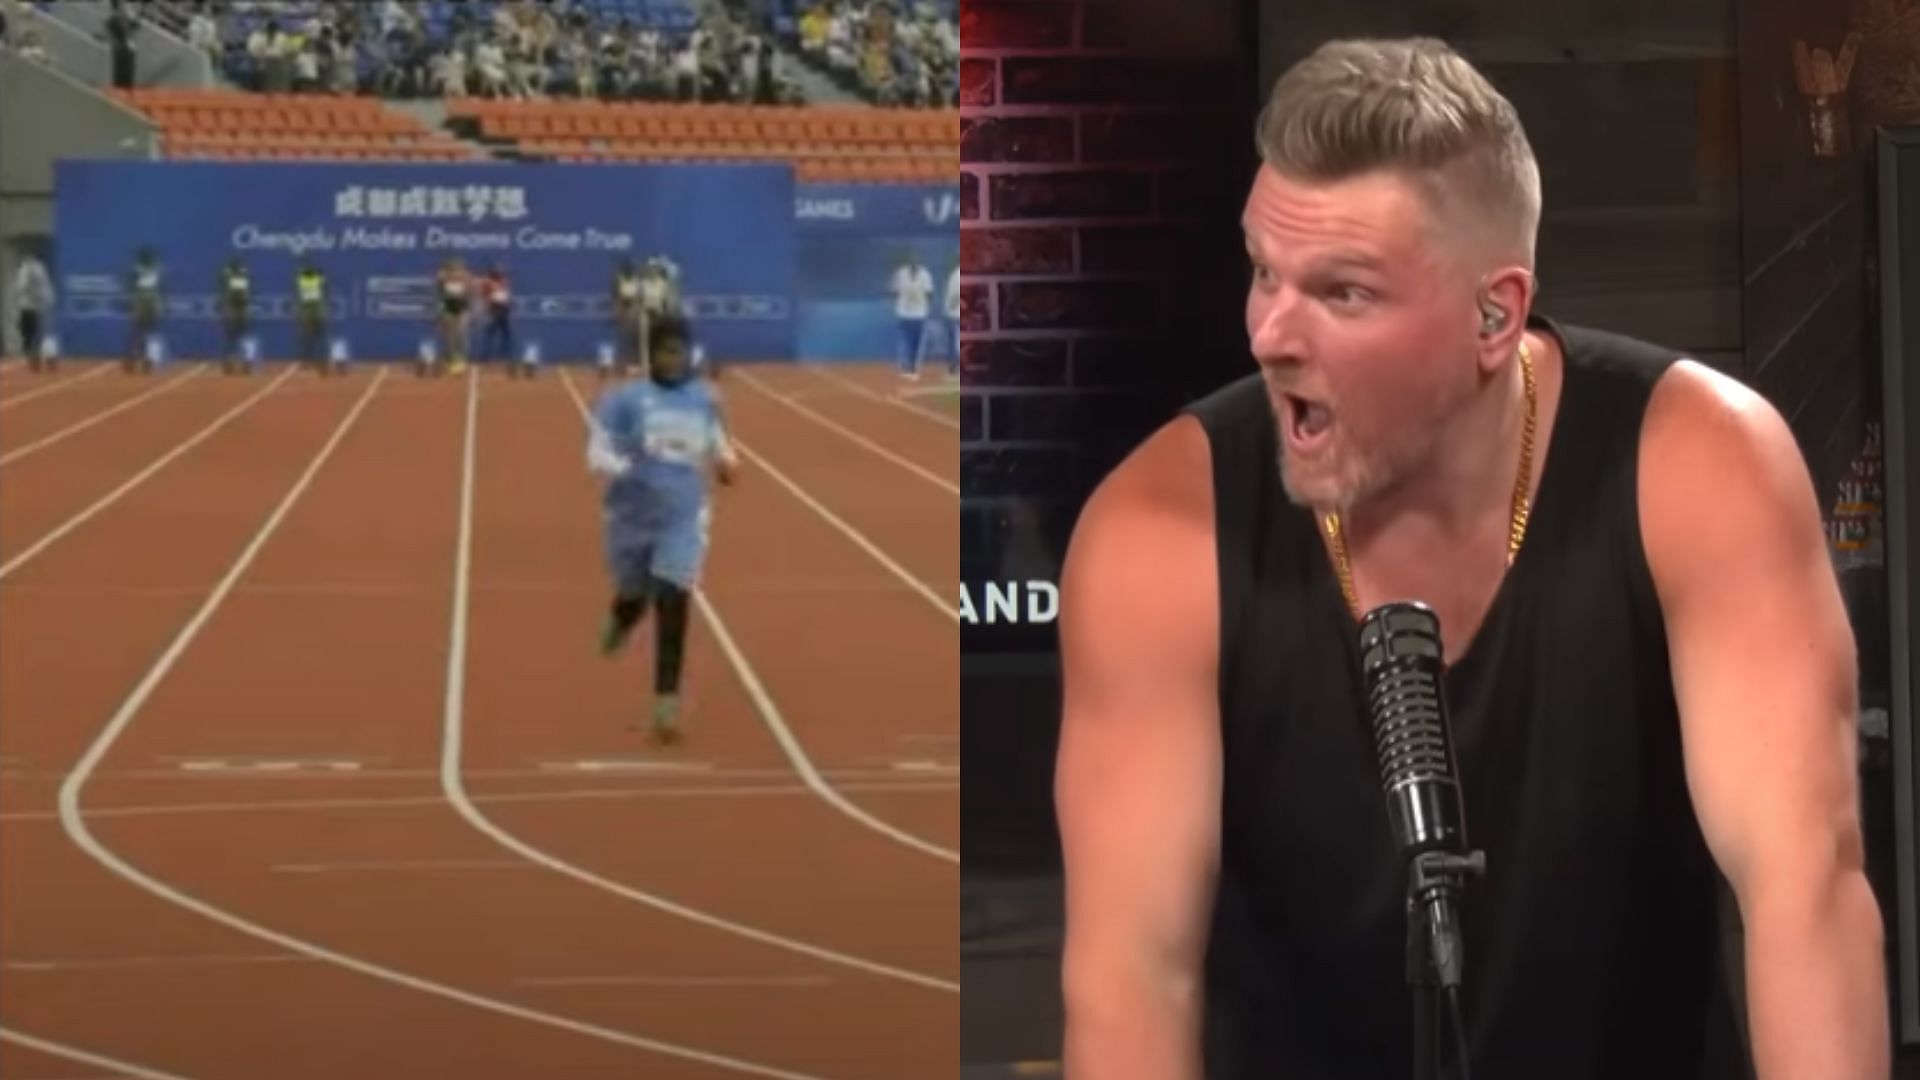 Pat McAfee was shocked after seeing the performance of an untrained Somalian in the 100-meter dash at the World University Games in Chengdu, China. (Image credit: Pat McAfee Show on YouTube)